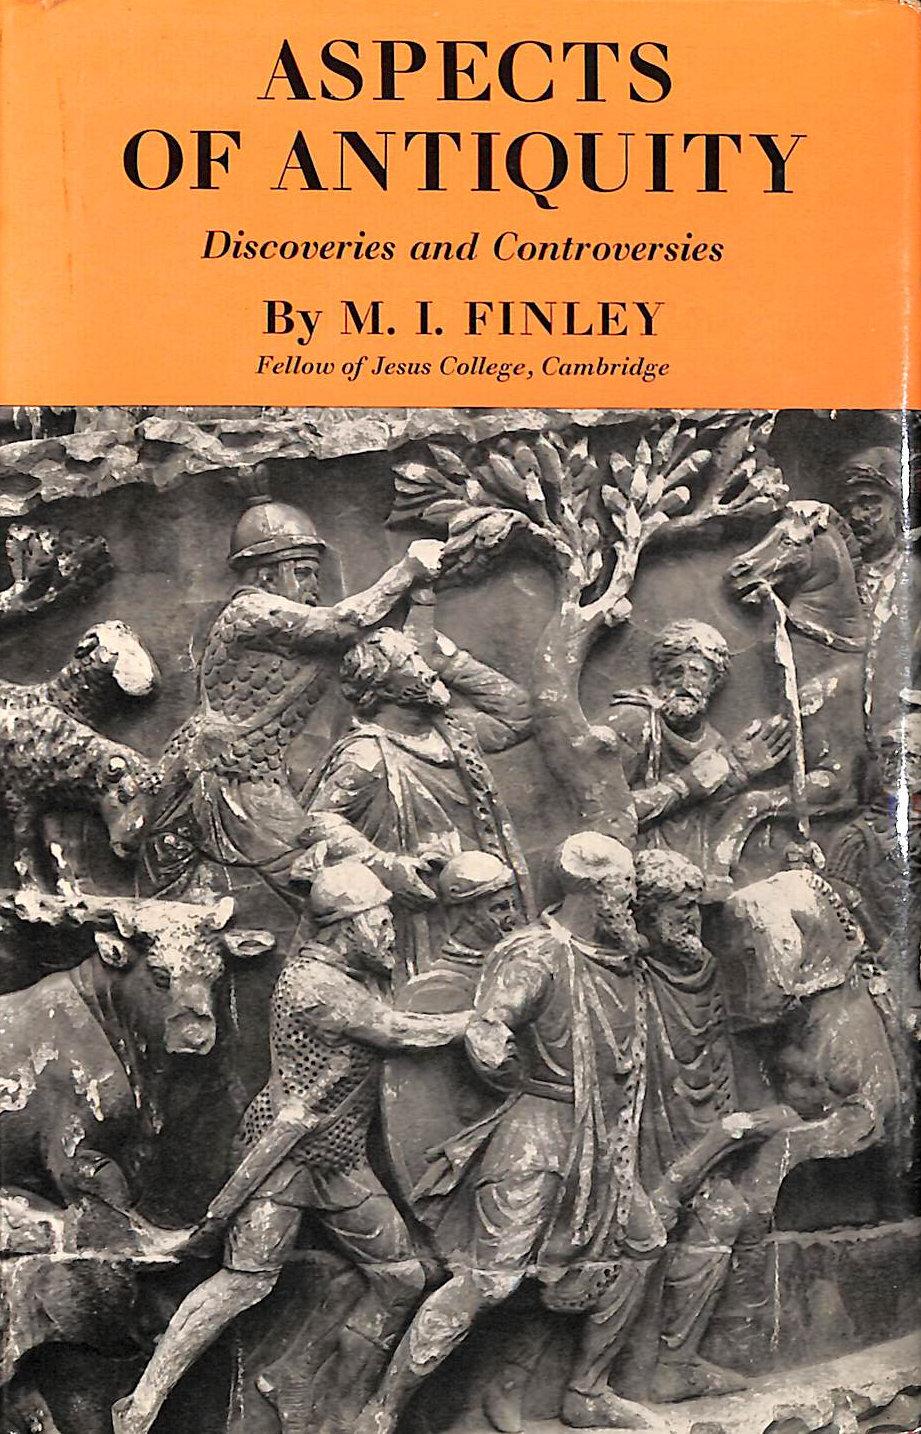 FINLEY, M. I. - Aspects of Antiquity: Discoveries and Controversies